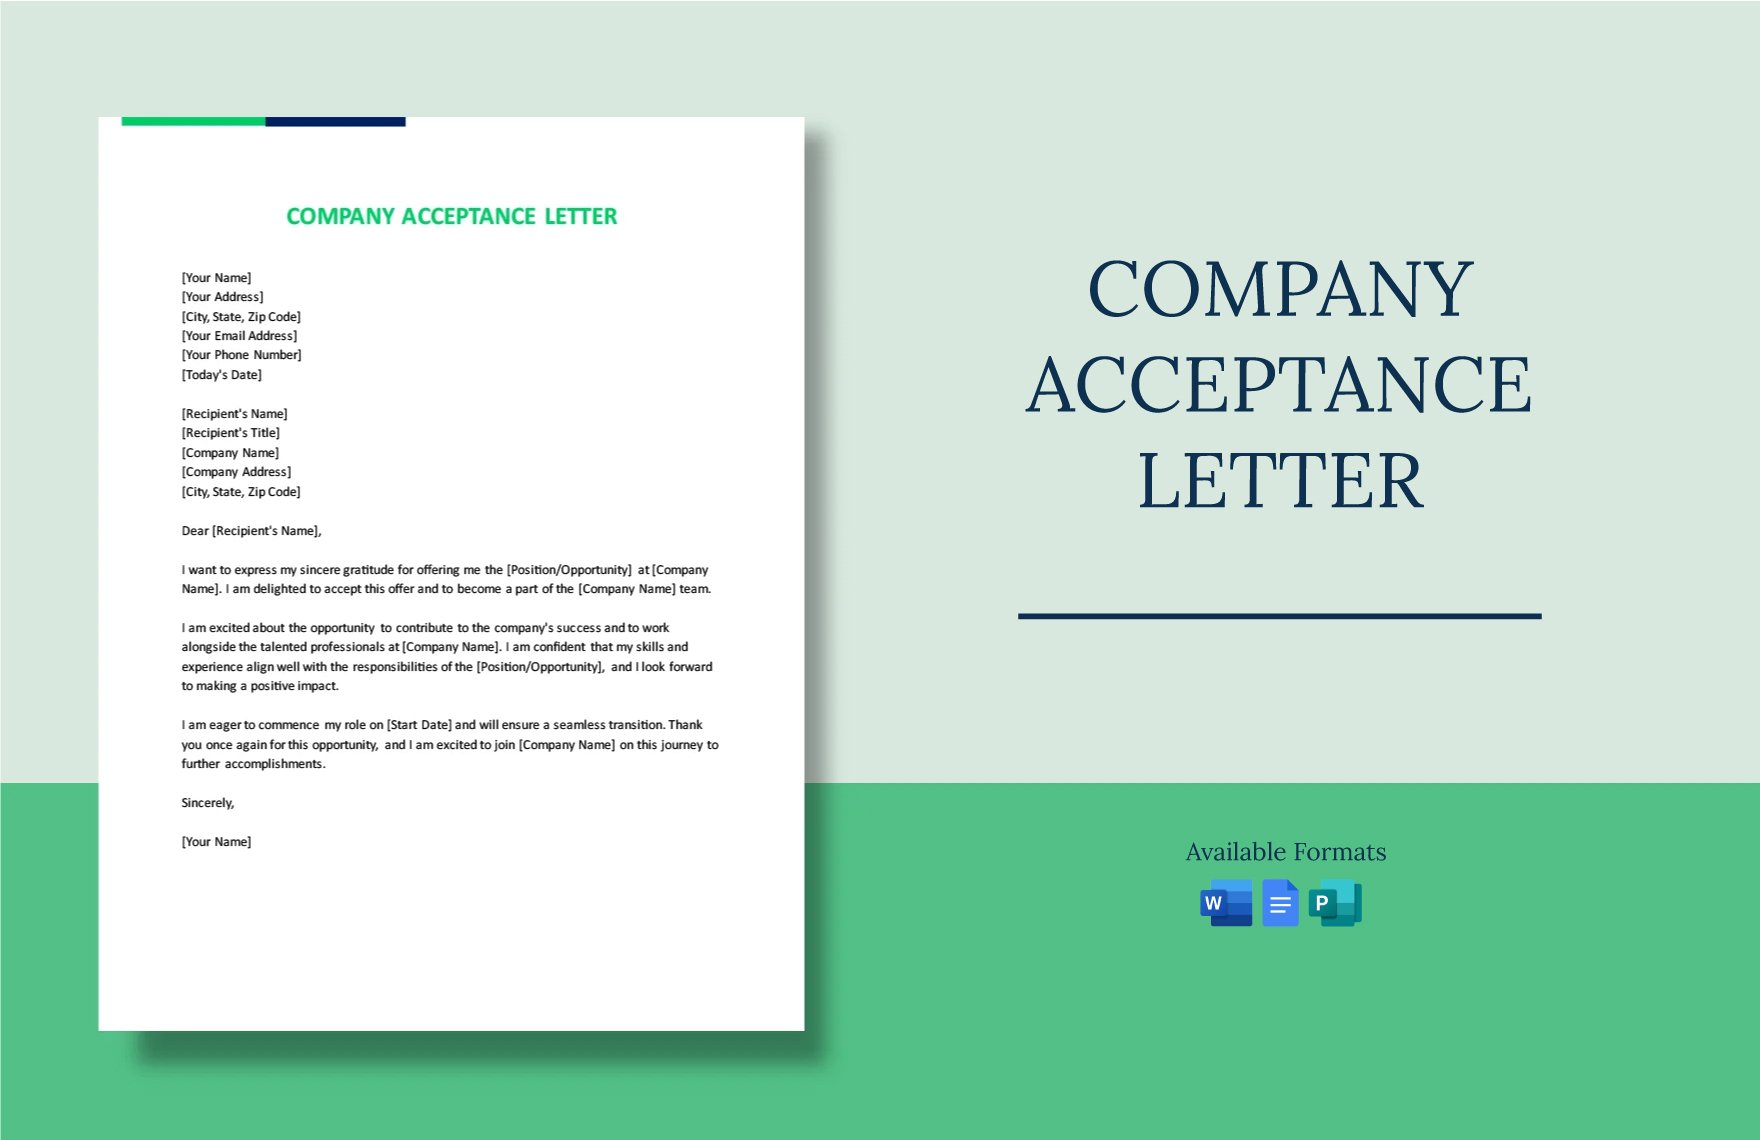 Company Acceptance Letter in Word, Google Docs, Publisher